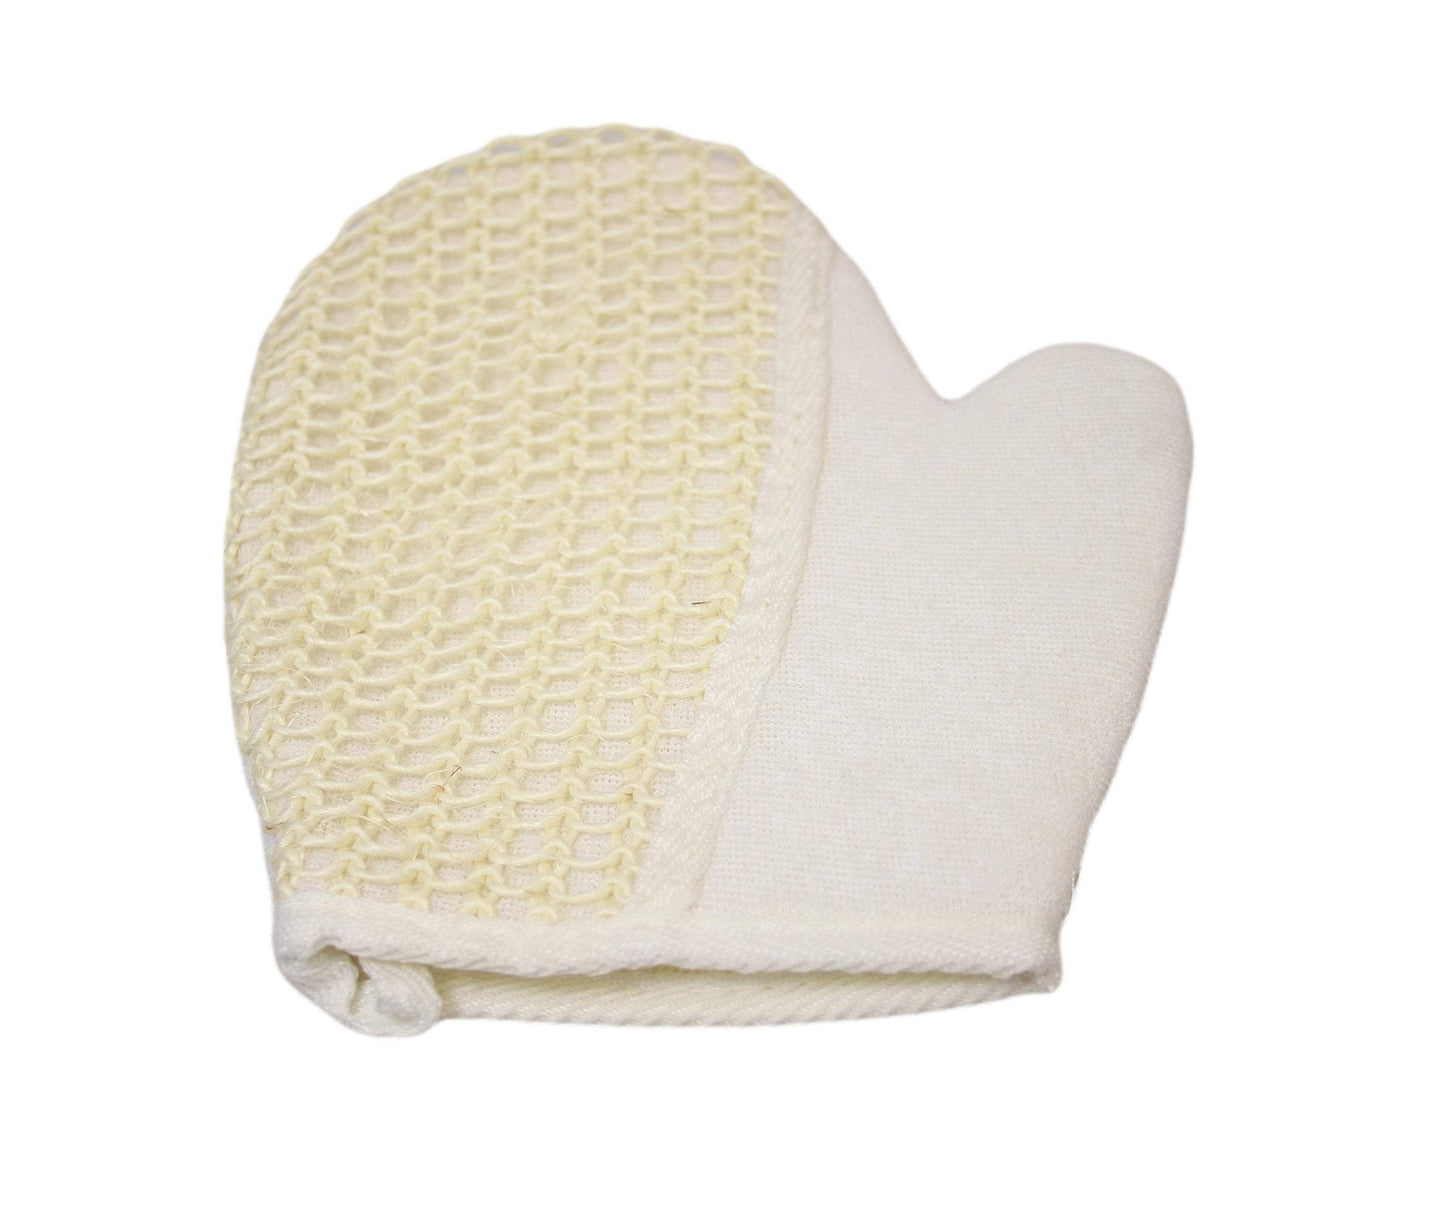 Exfoliating Loofah & Towel Mitt Glove Double Sided Bath Spa Glove 1 Pack 5230 (Large Letter Rate)